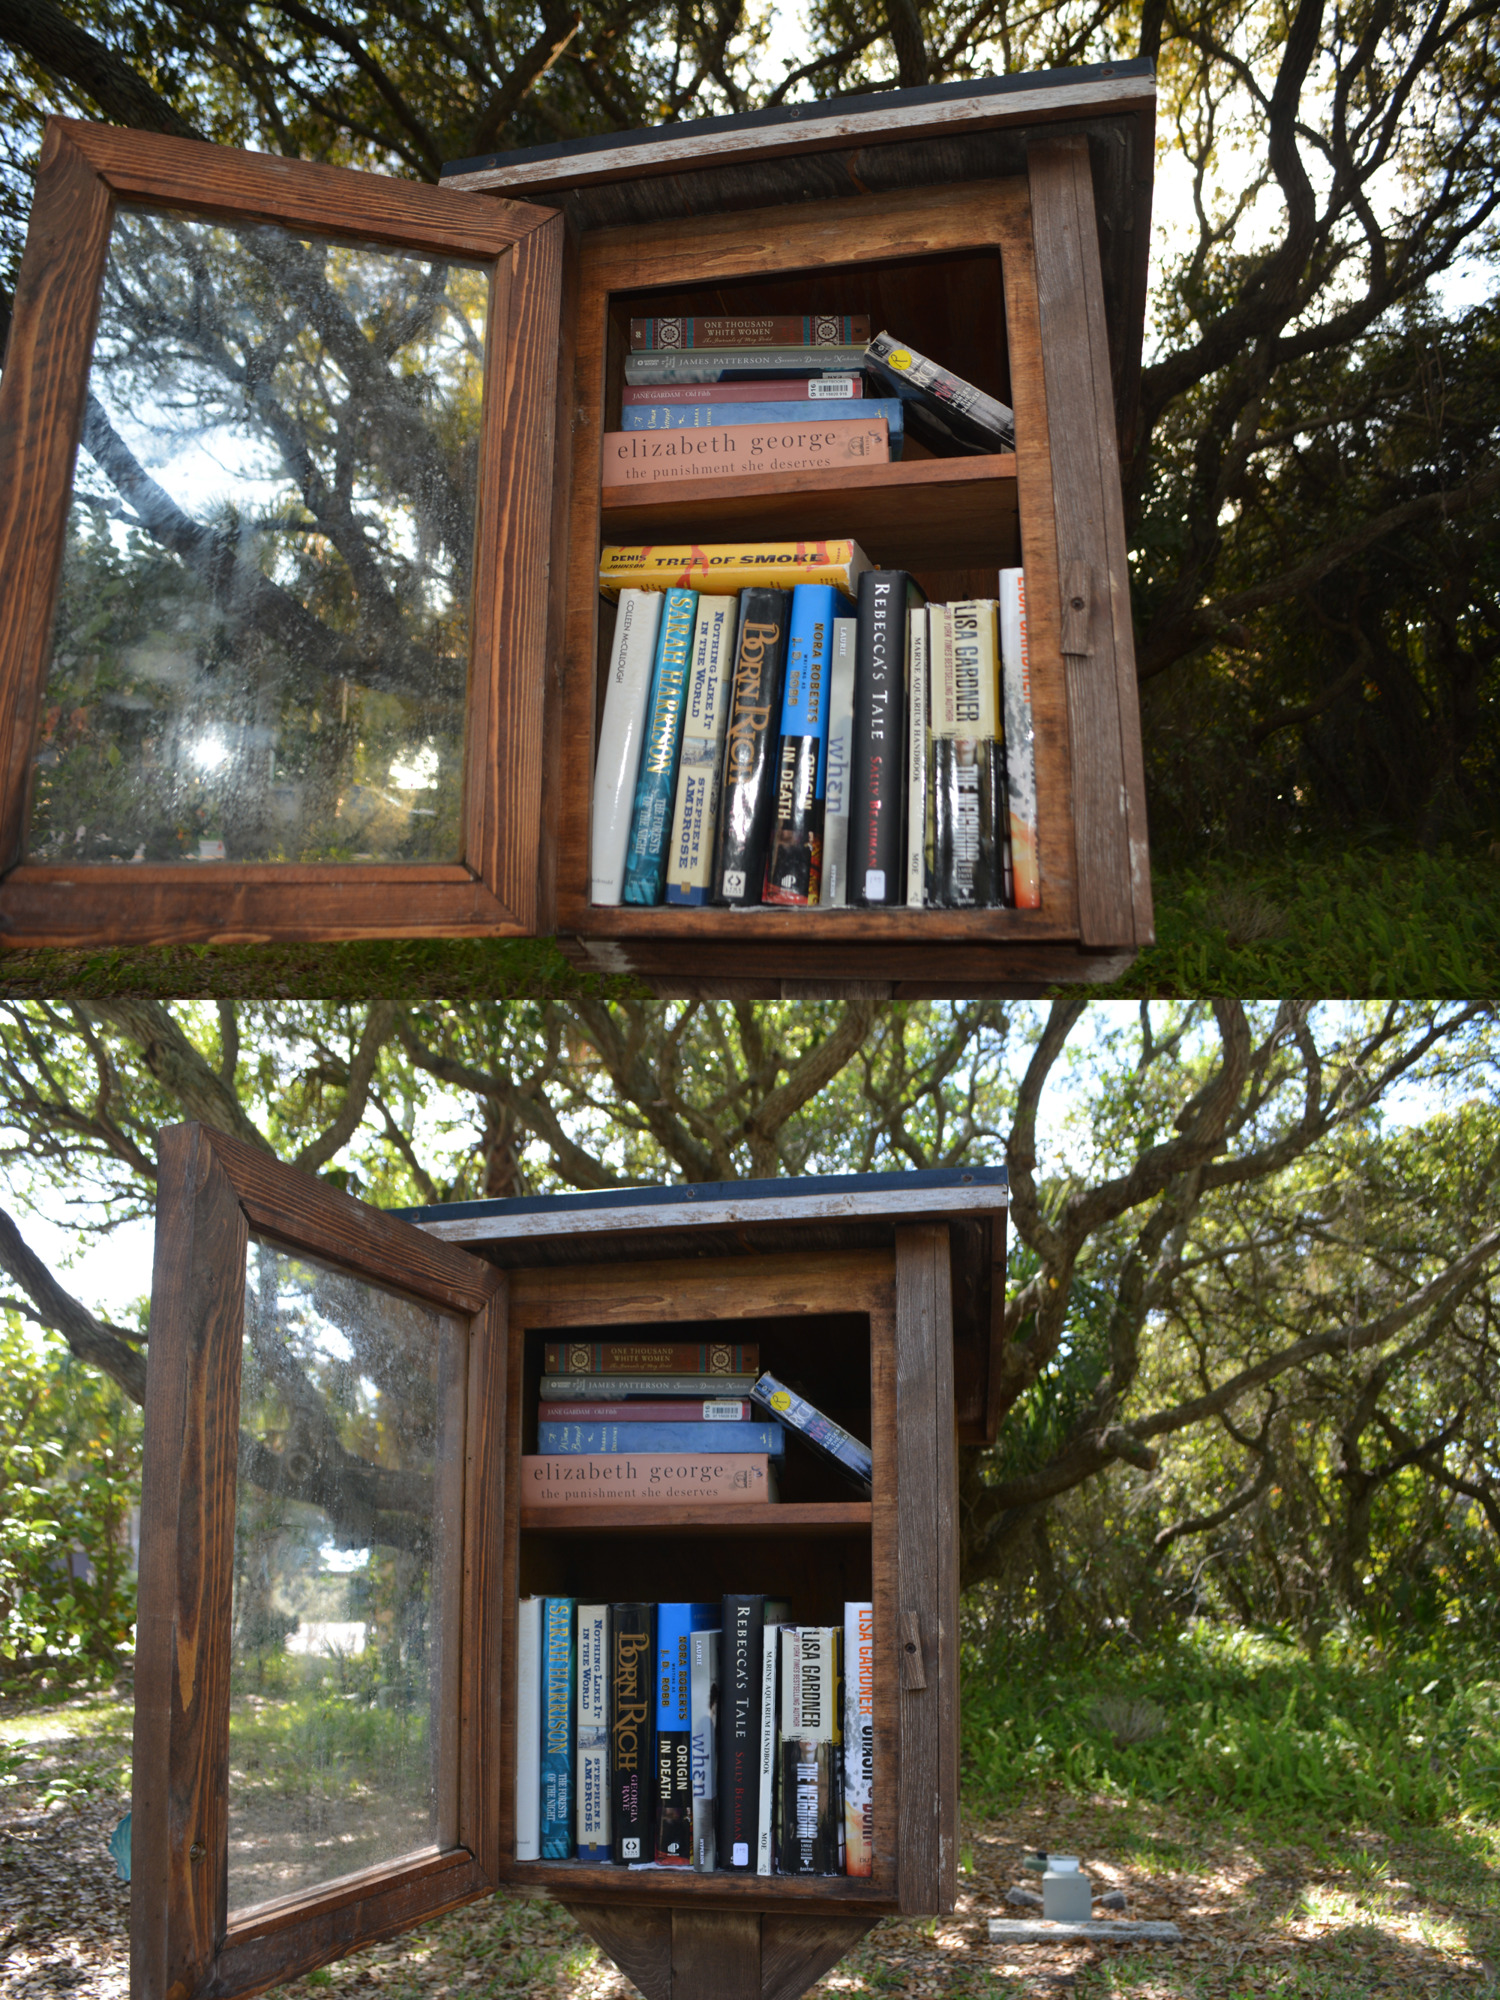 The Little Free Library at Bicentennial Park on March 6 (top) and March 12.